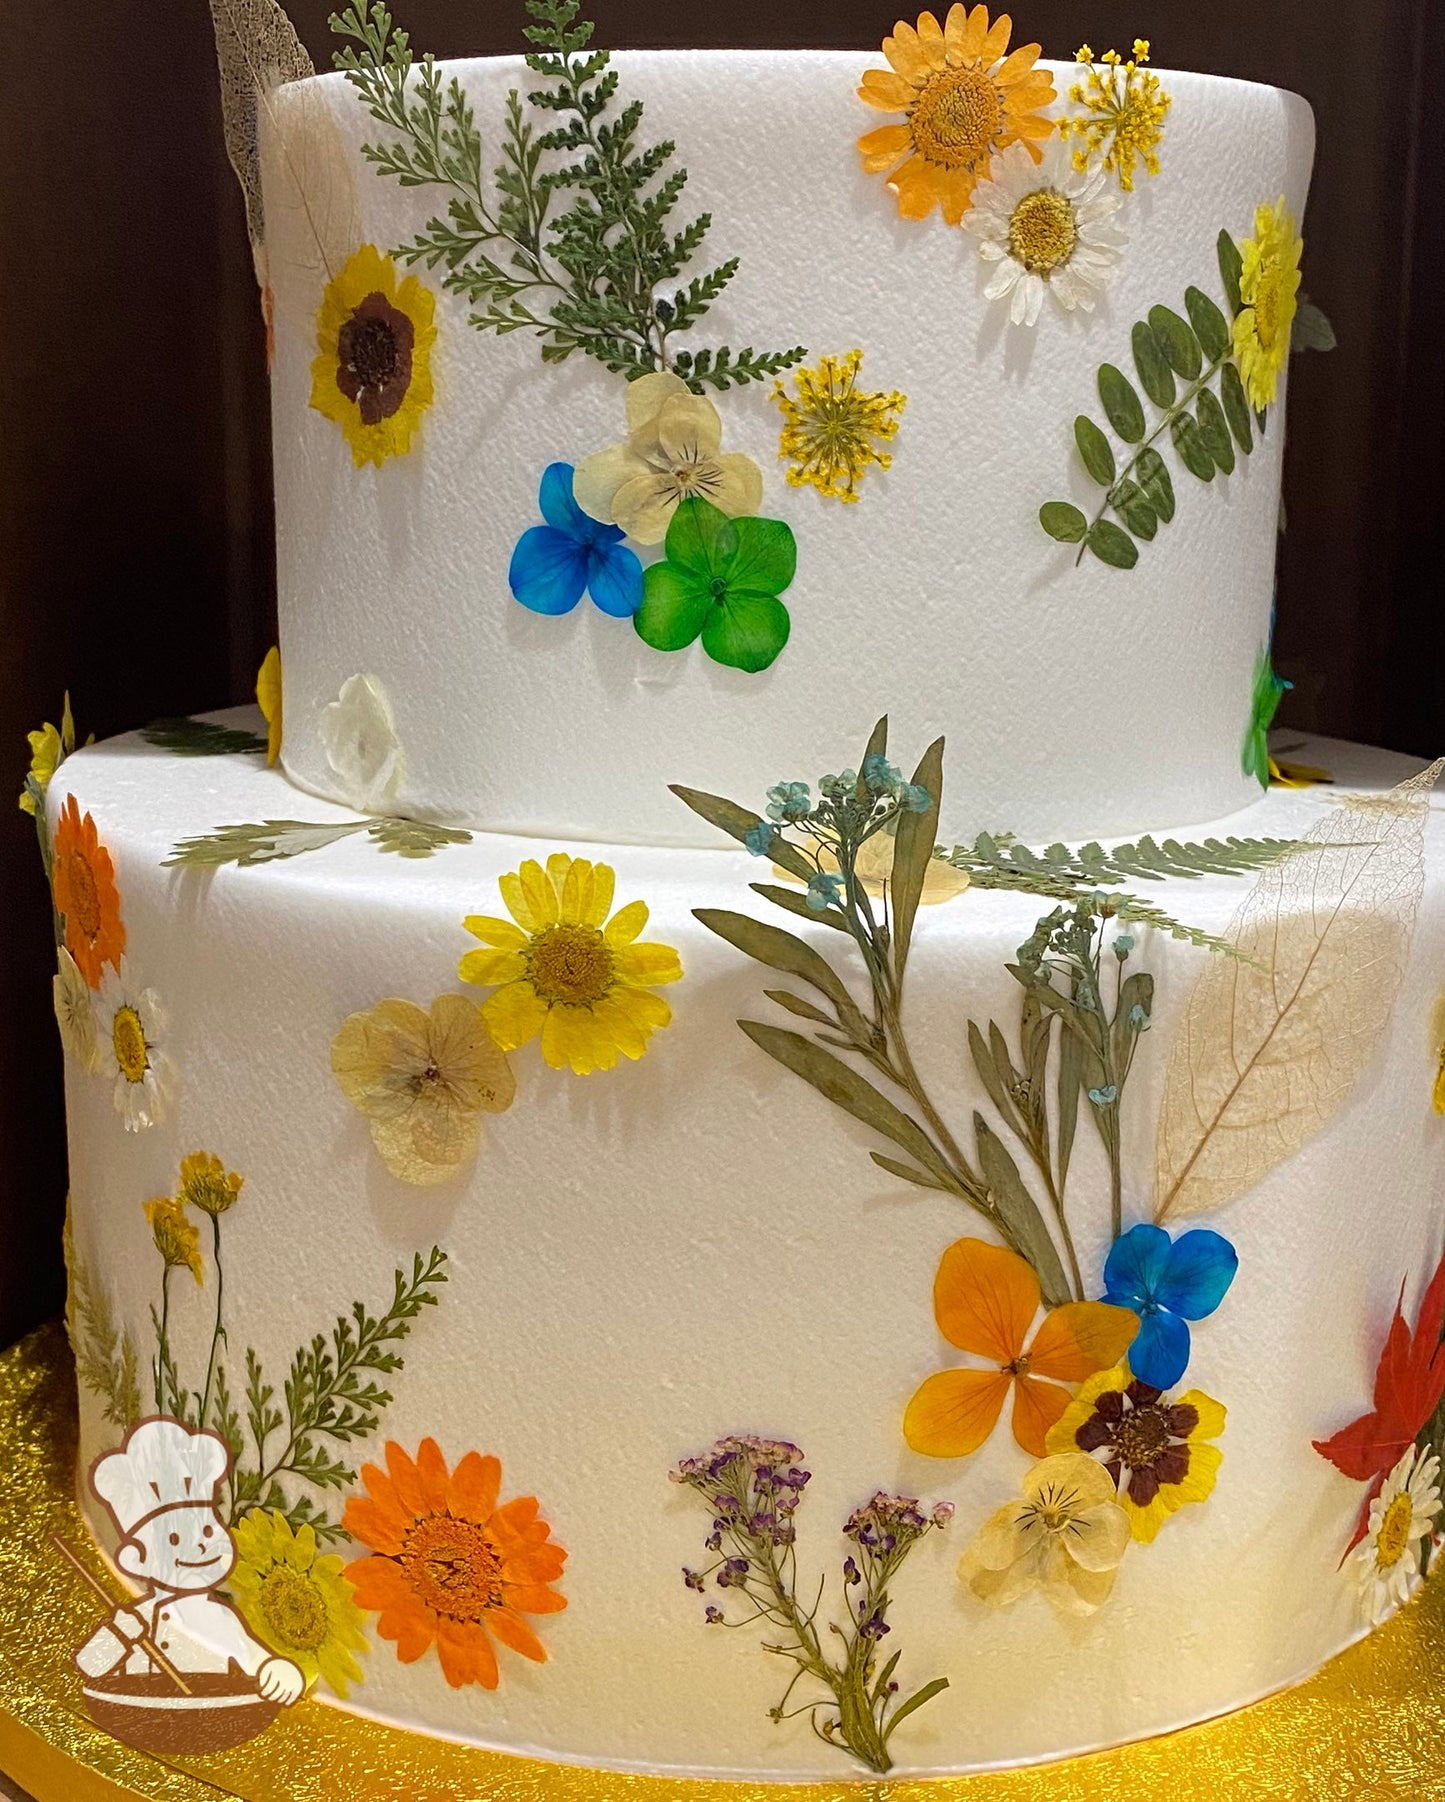 2-tier cake with smooth white icing and decorated with dried pressed flowers all over the cake in yellow tones.